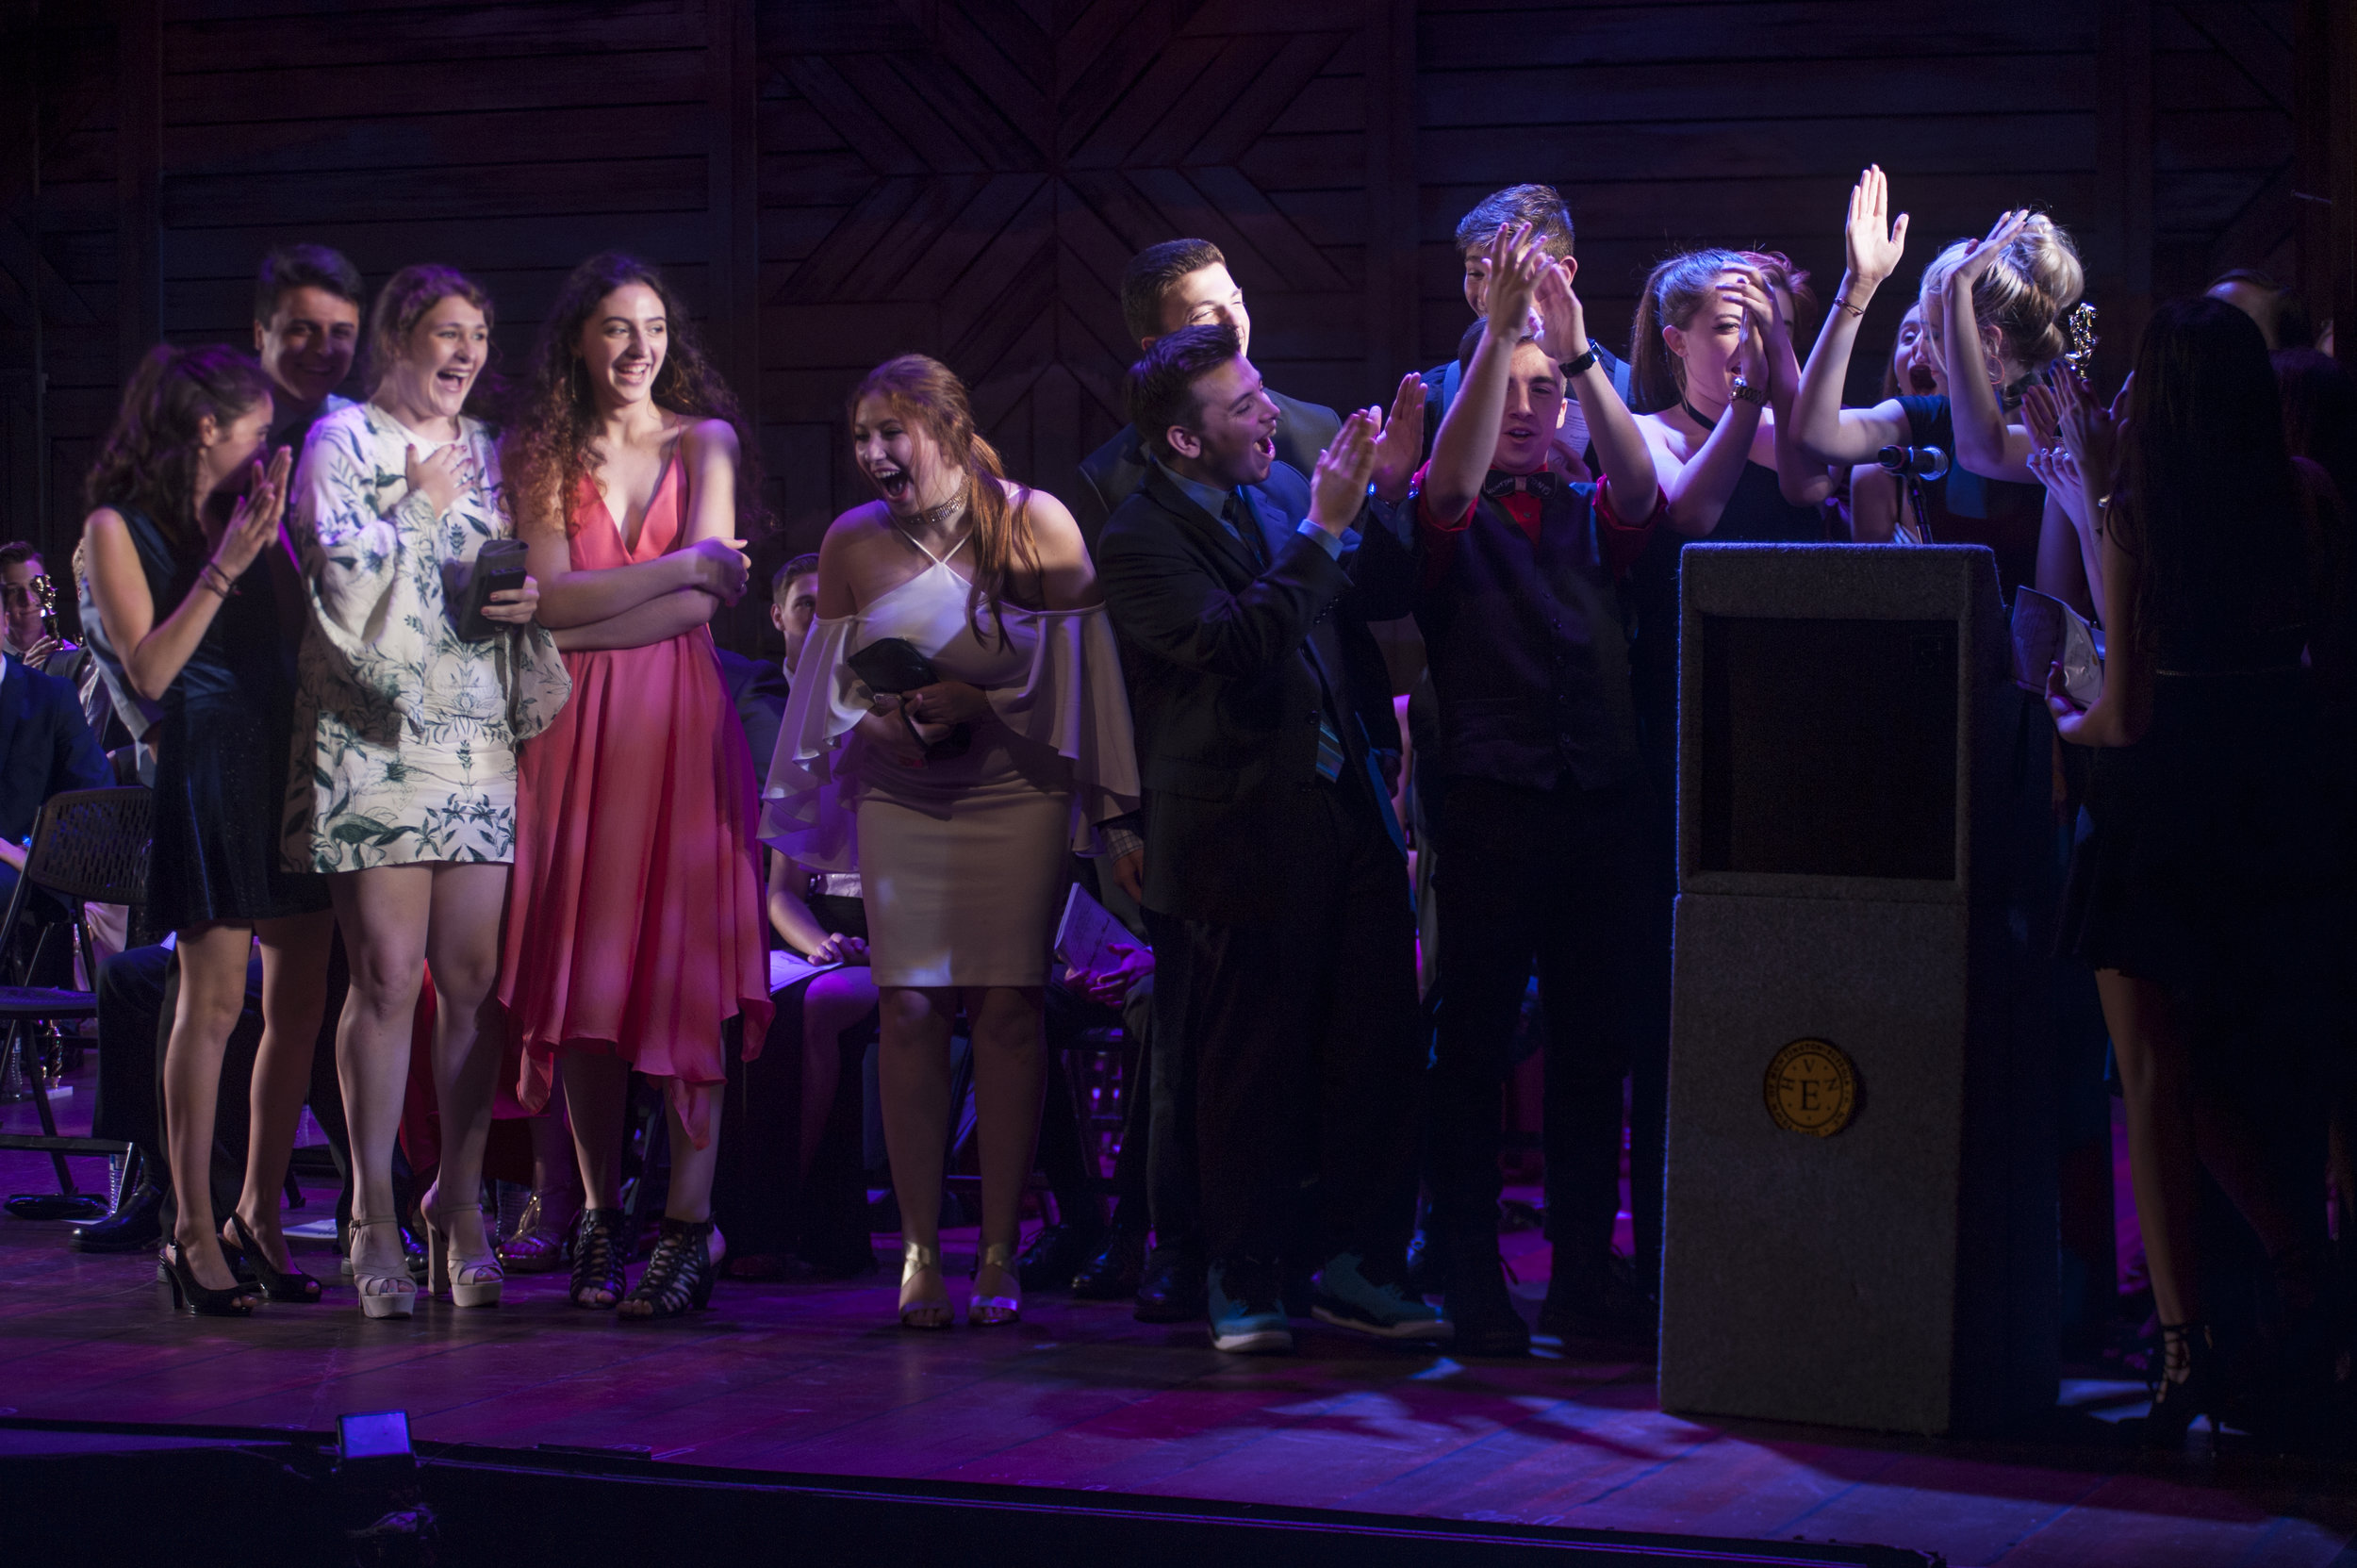  Cast members of Harborfields High School's “Guys and Dolls” celebrates their win for “Best Musical” at this year’s Hunting-Tony awards show. 